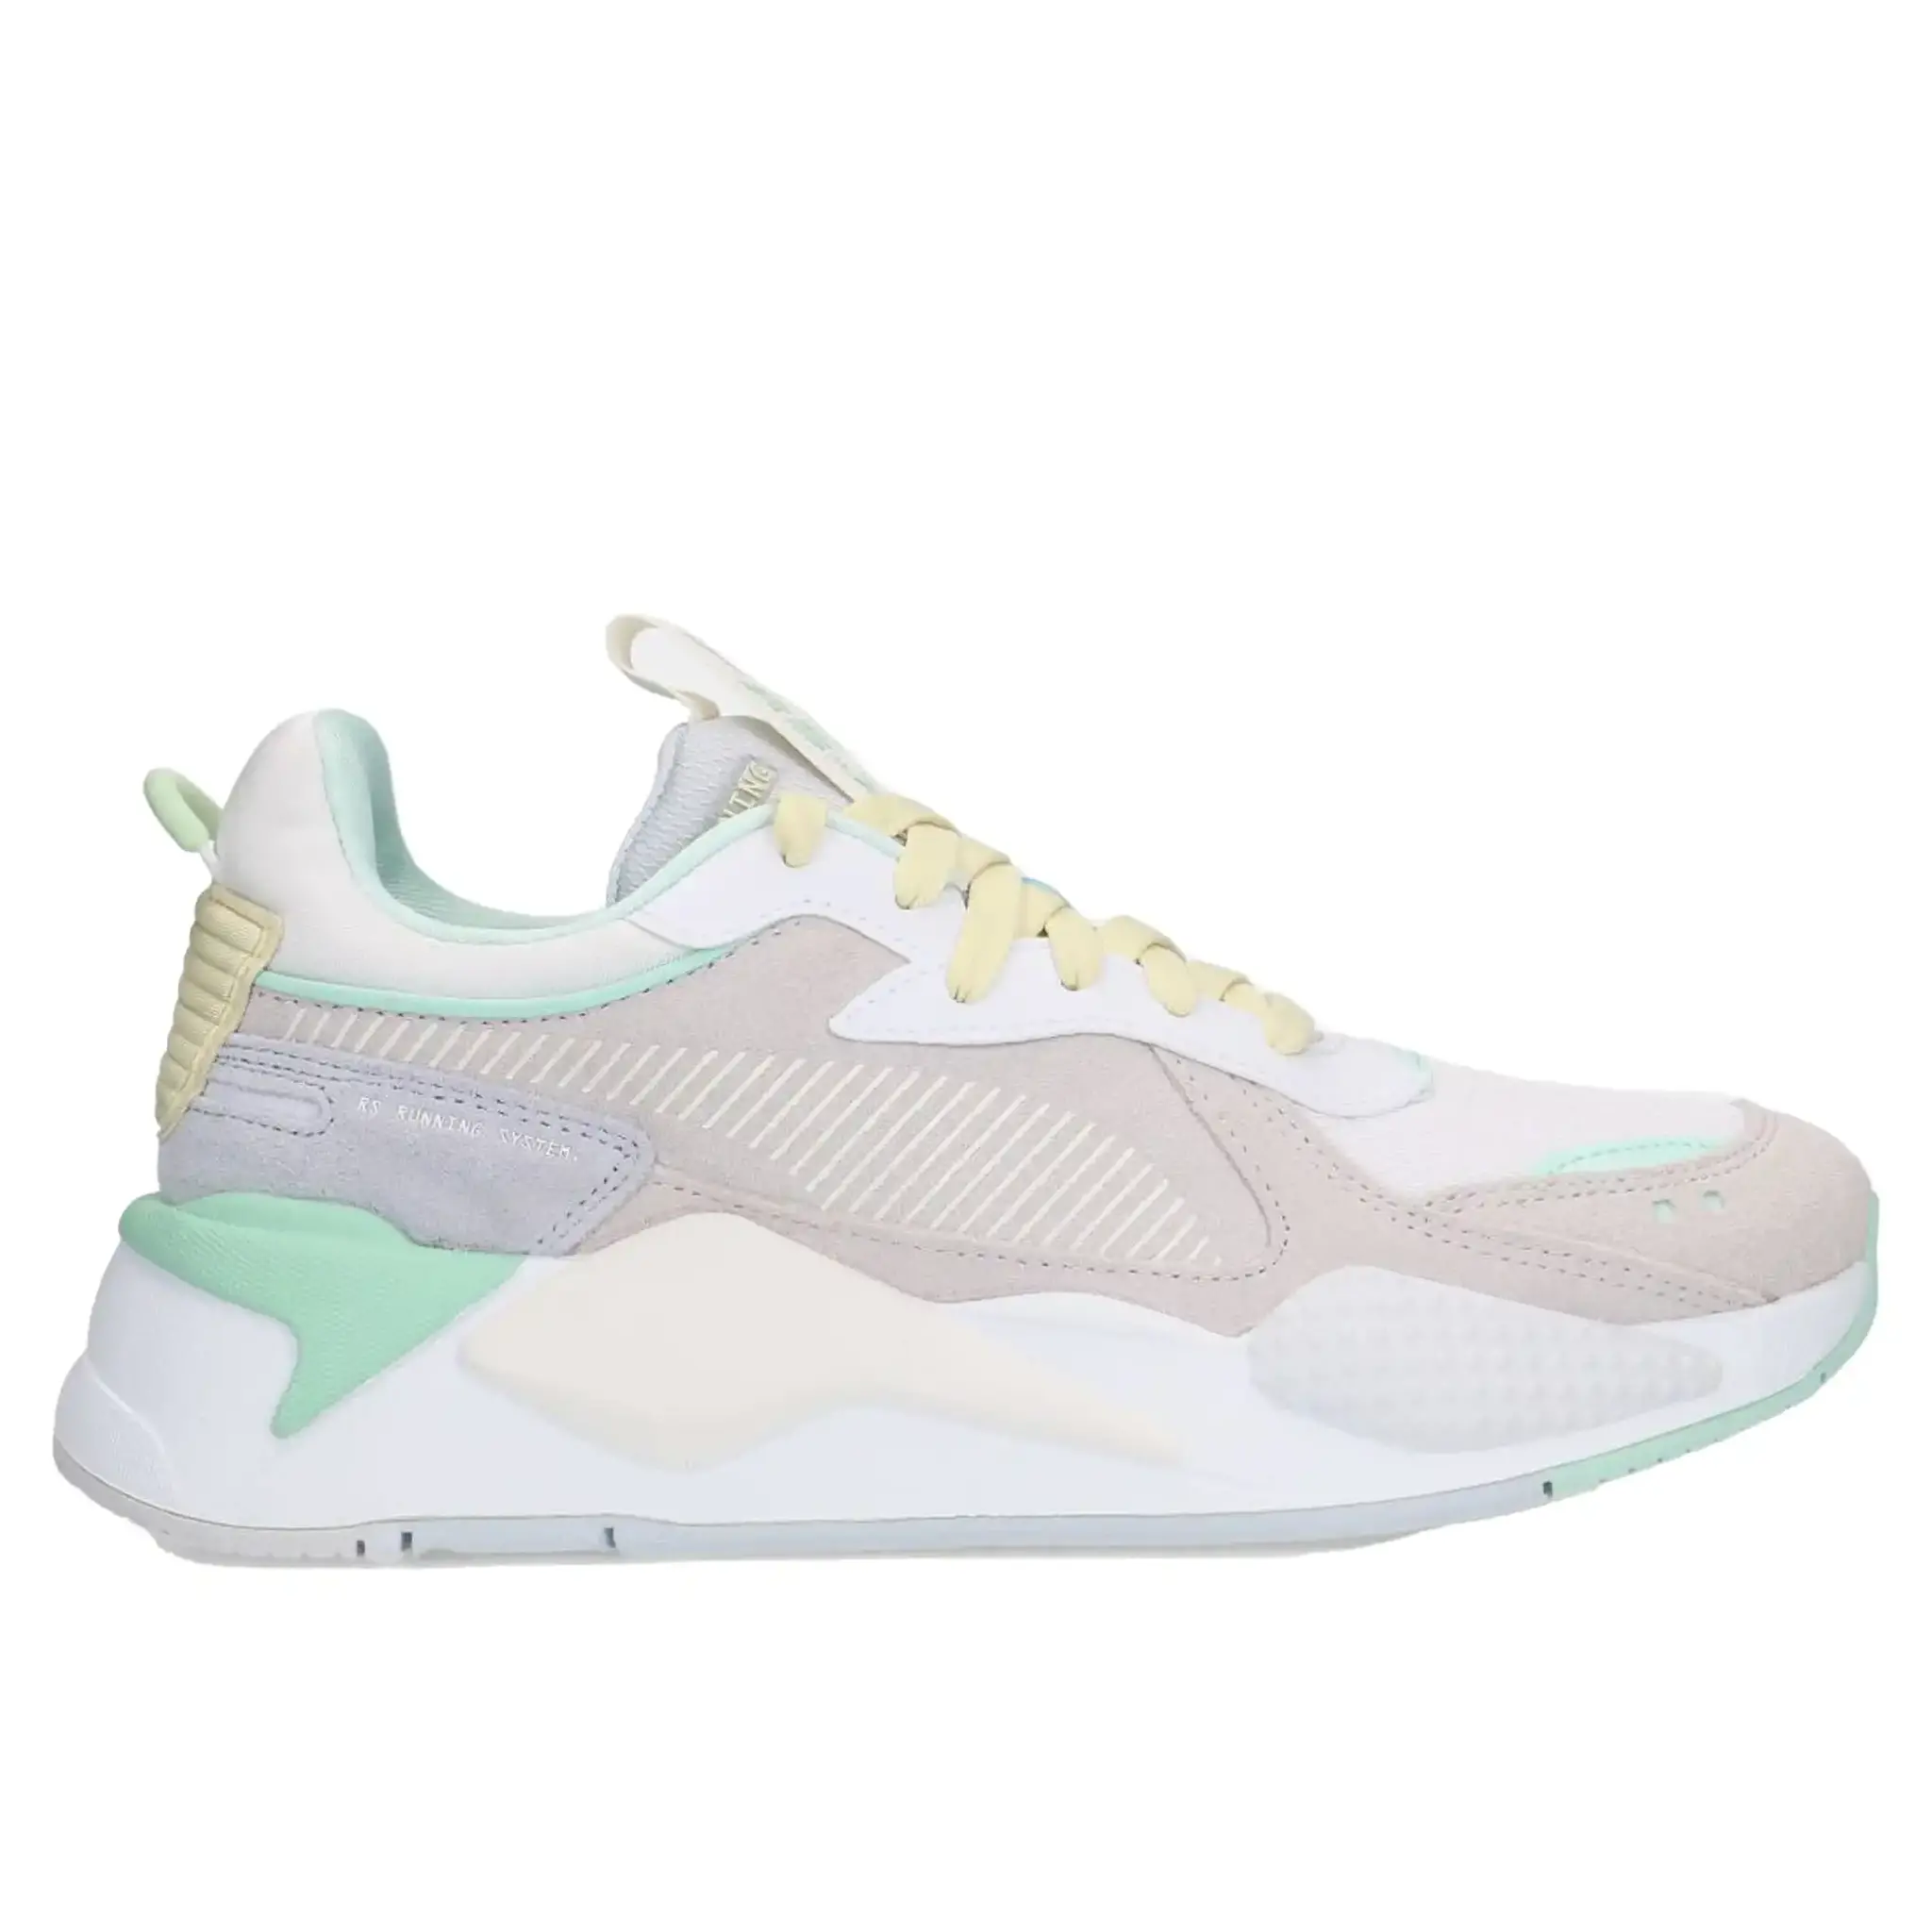 Puma RS-X Reinvention White / Feather Gray dames sneakers Wit 10395